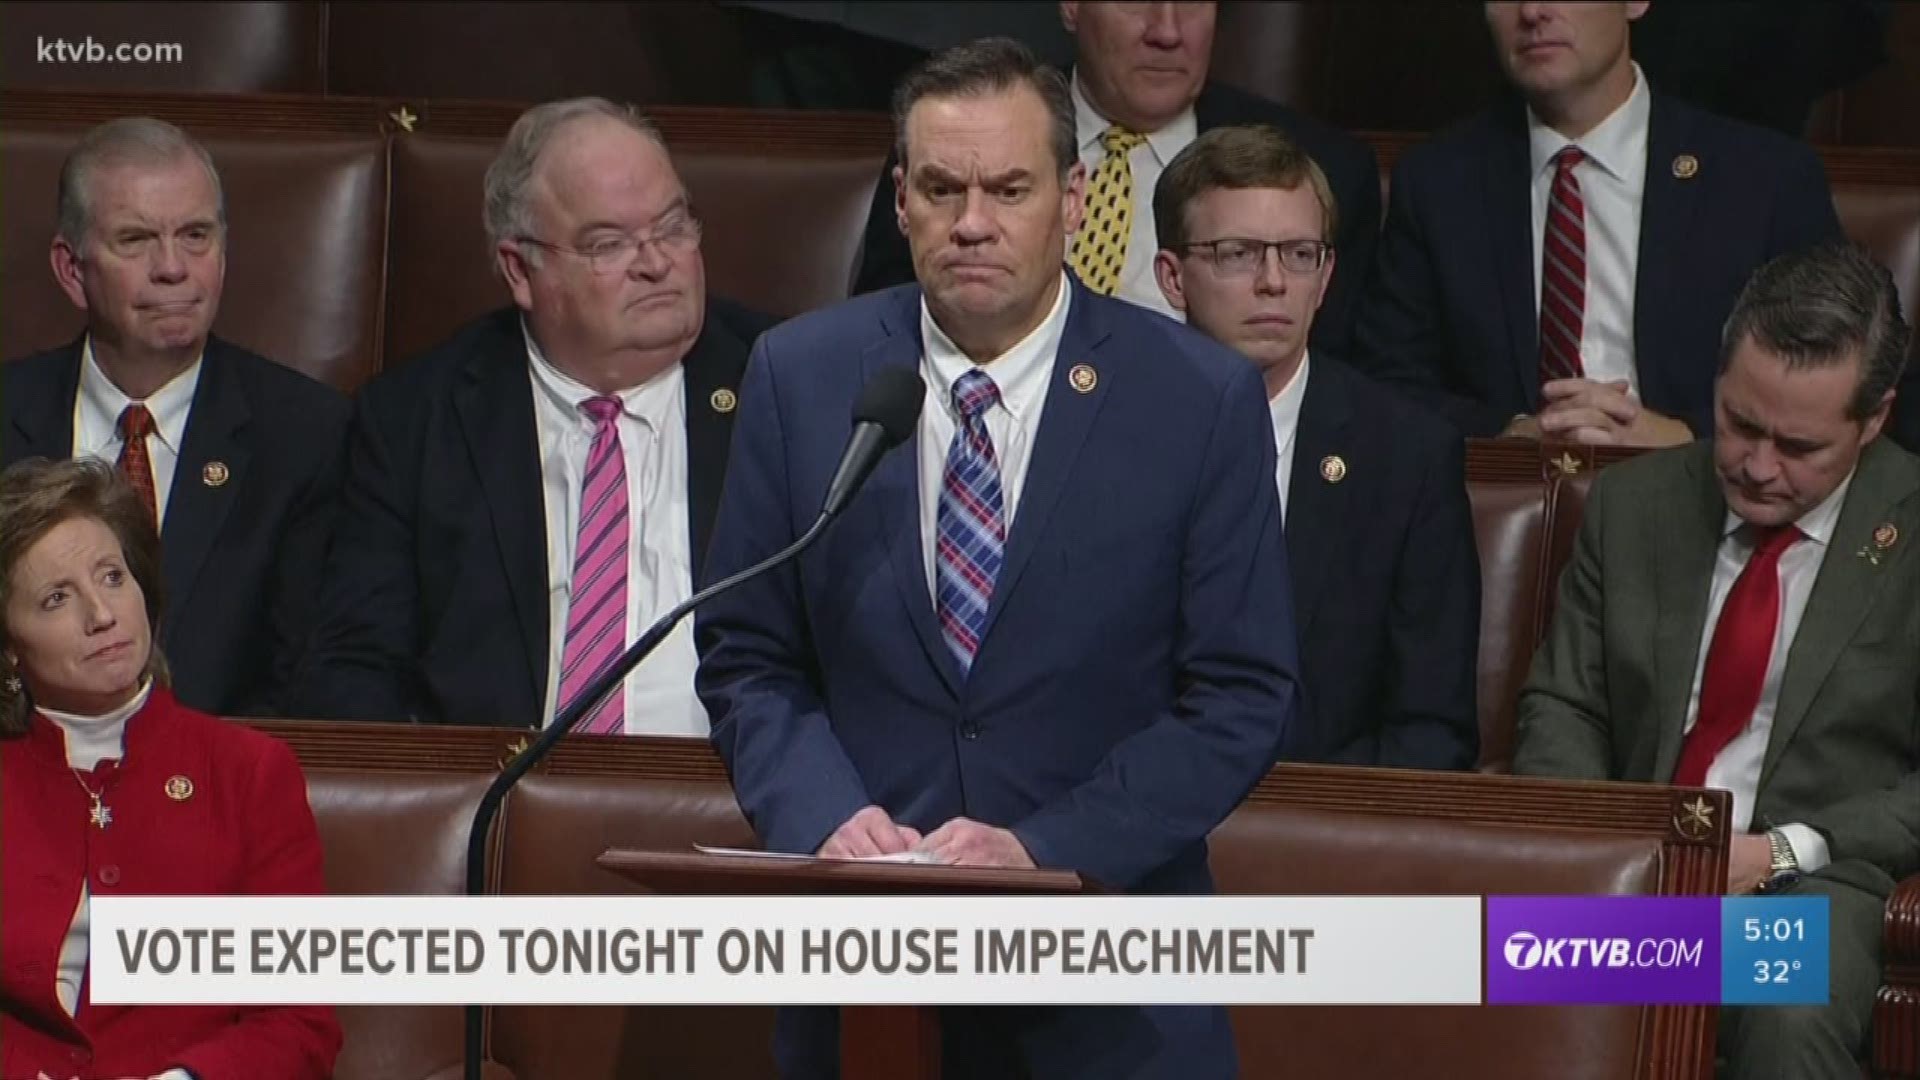 Idaho Republican Rep. Fulcher got his chance to speak on the impeachment. He was a man of few words.